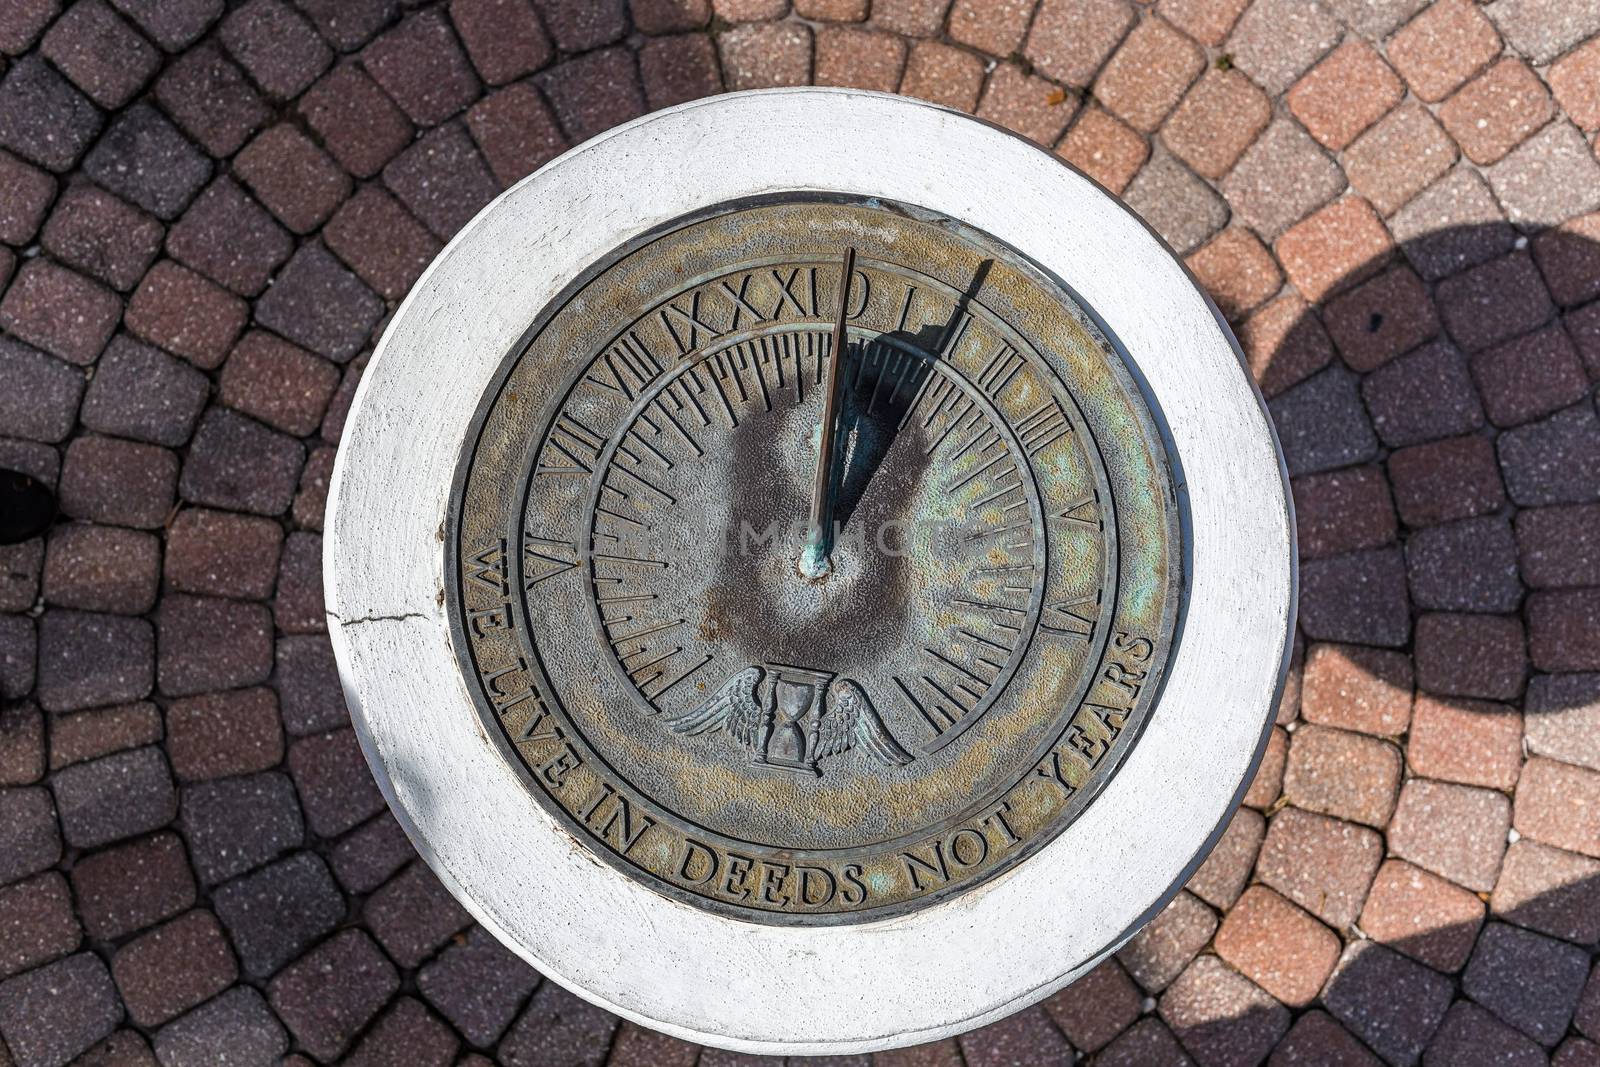 A sundial shows the time in the early afternoon.